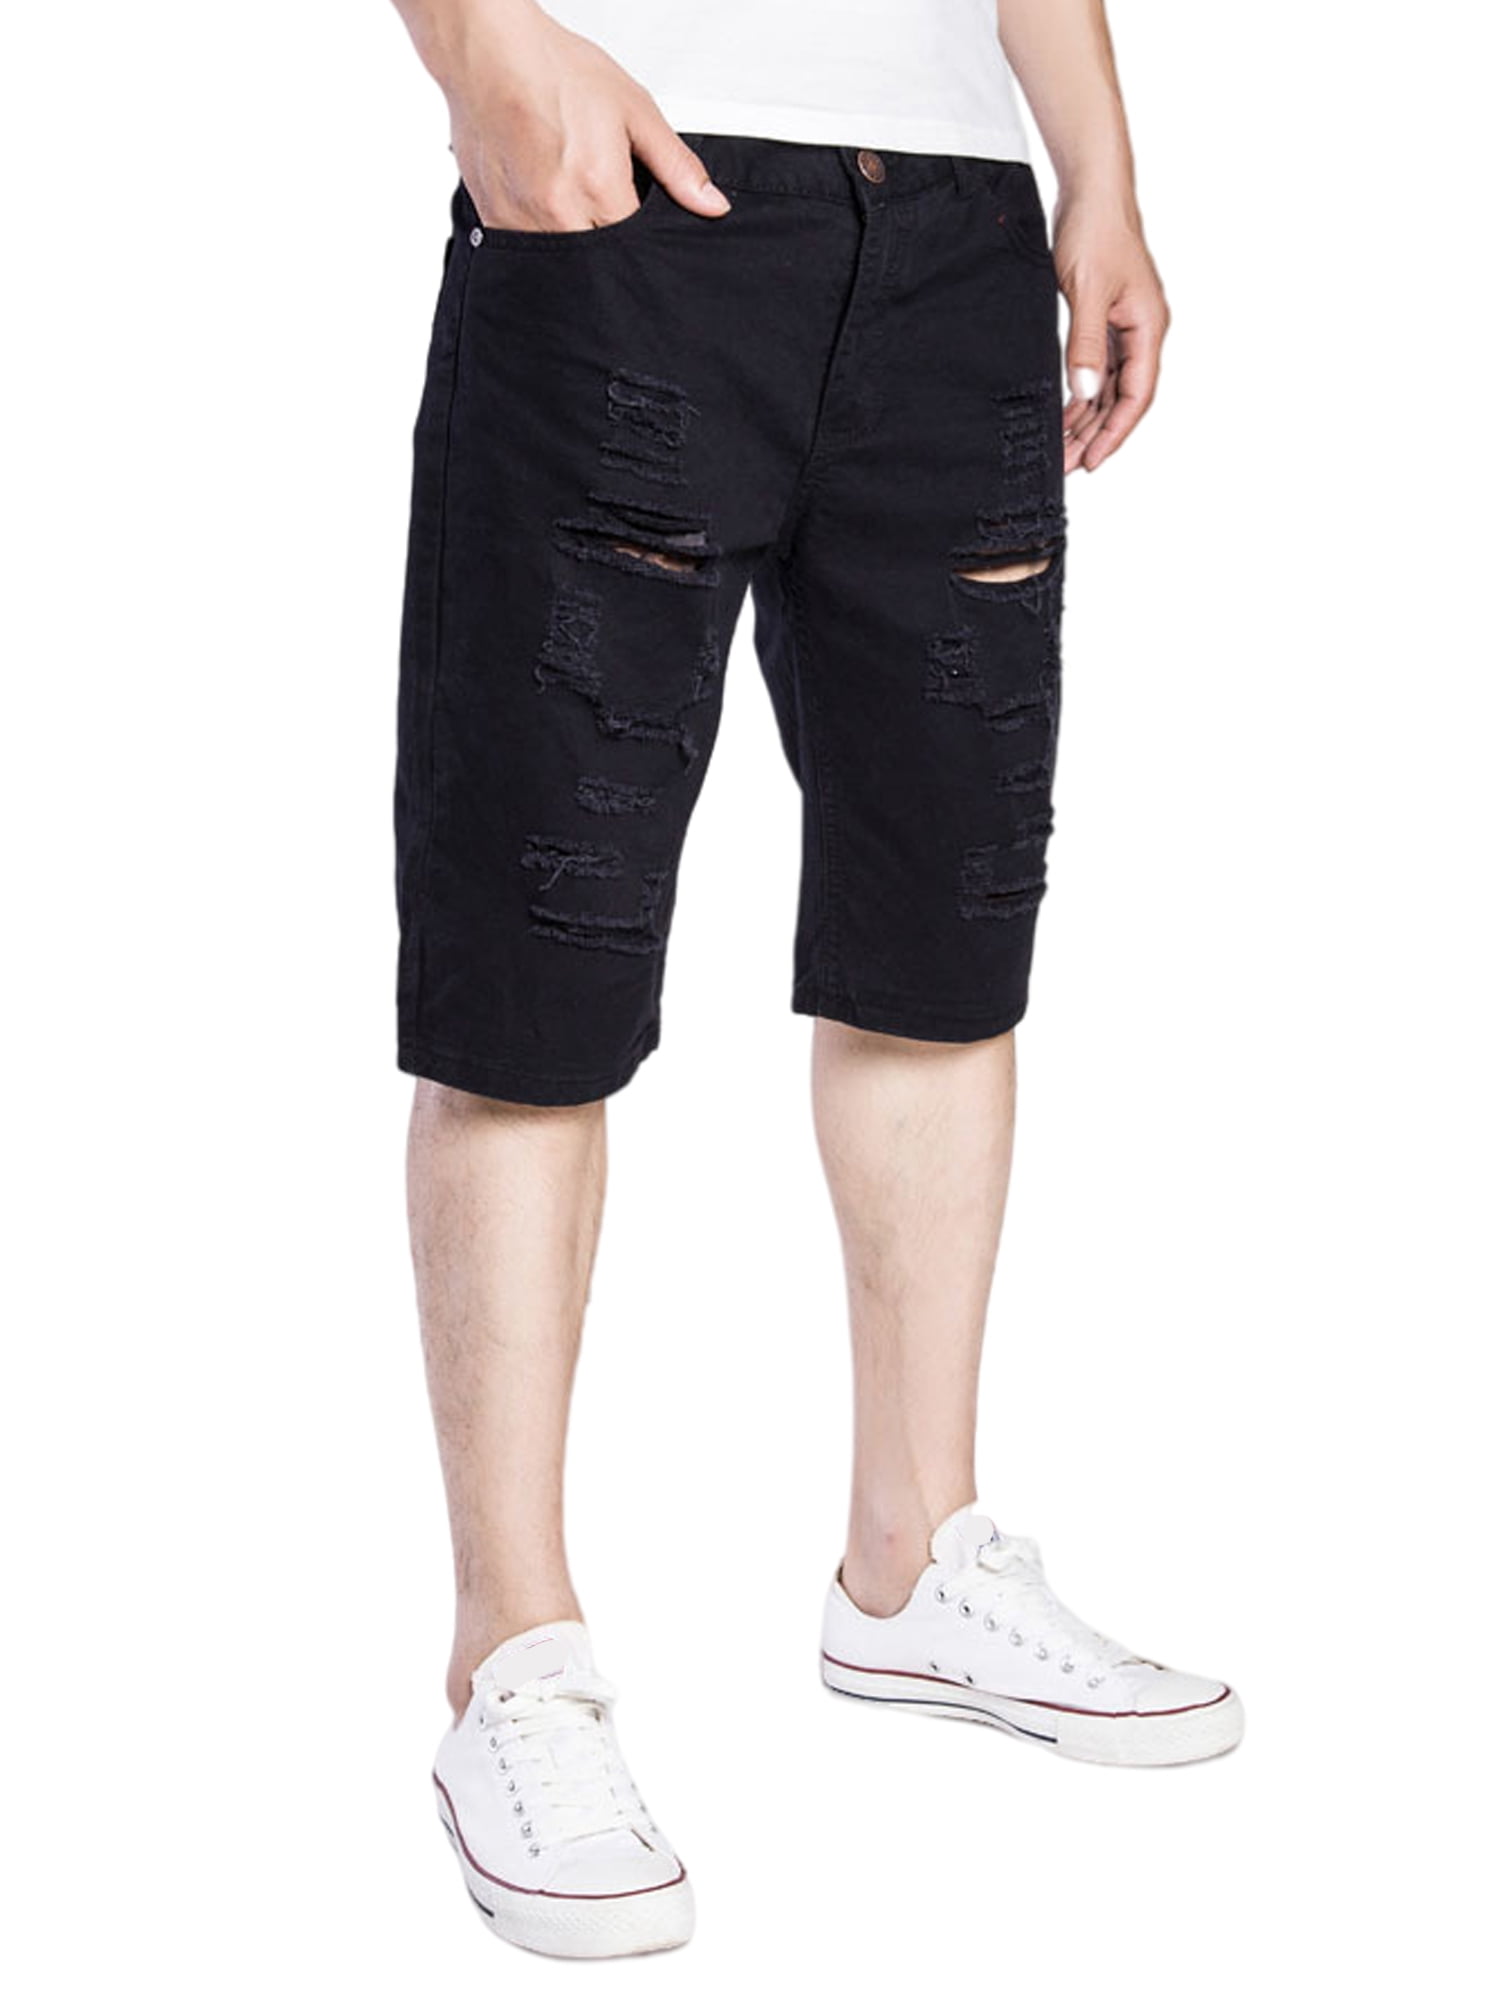 Frontwalk Mens Casual Ripped Jean Shorts Slim Fit Hole Short Pants